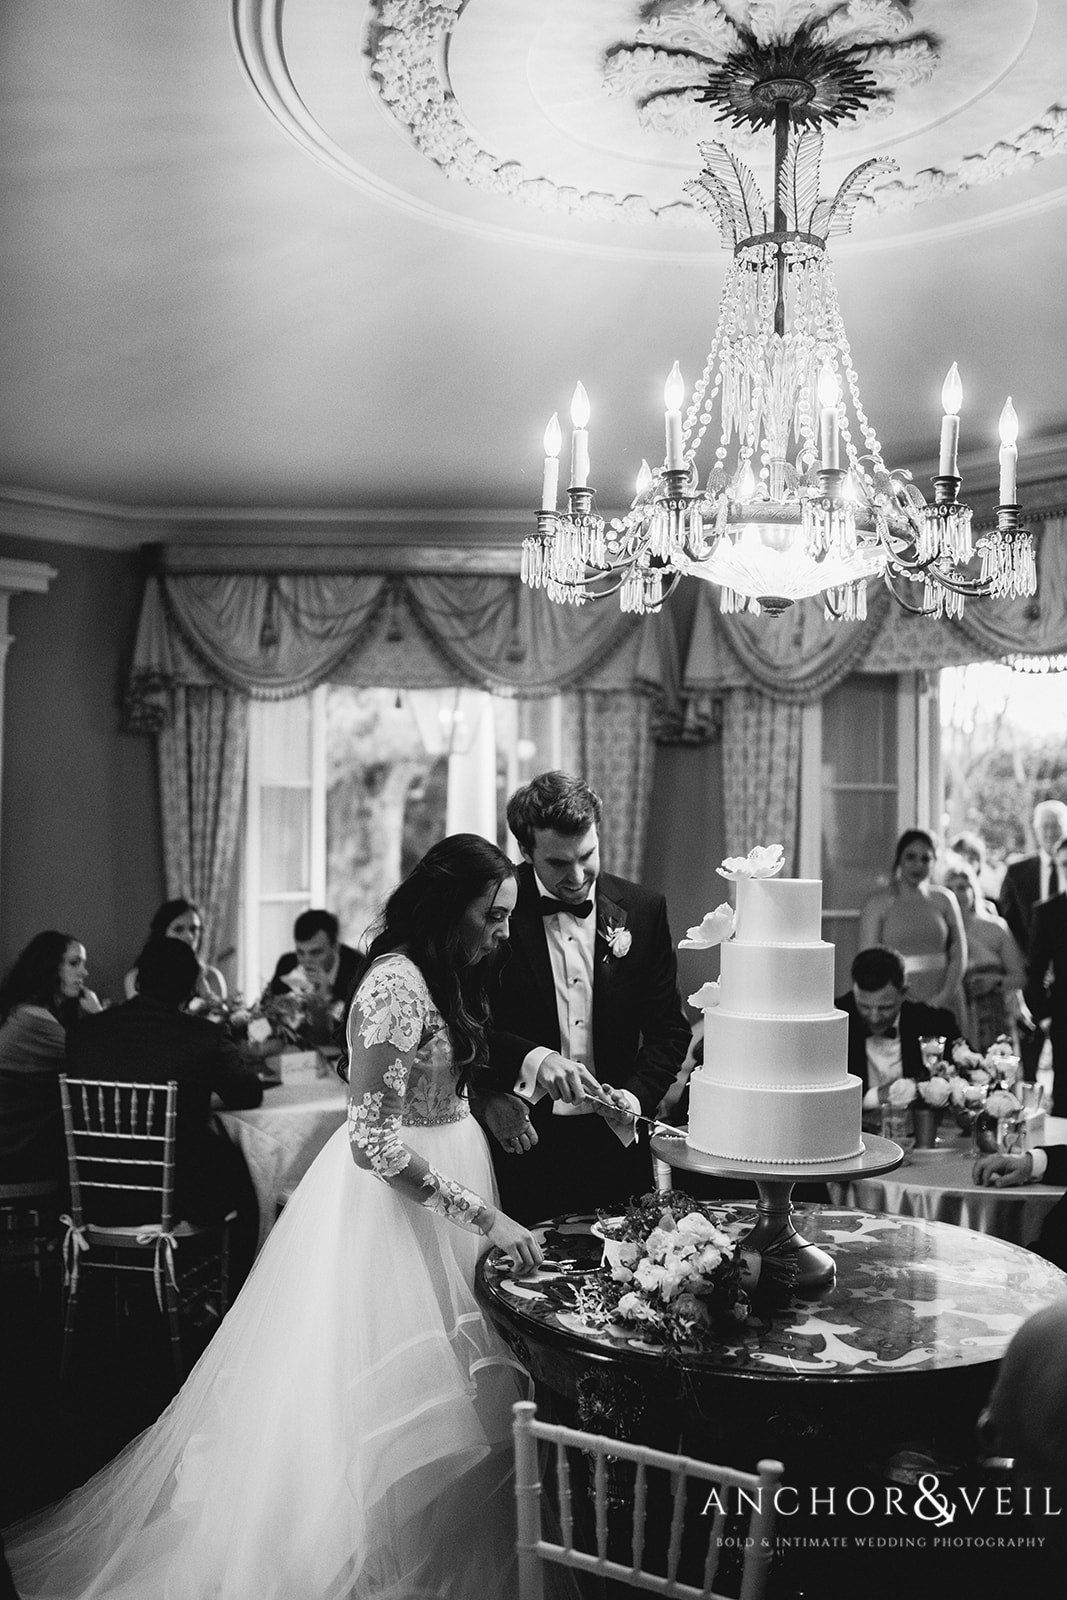 The bride and groom cutting the cake at the William Aiken House Wedding